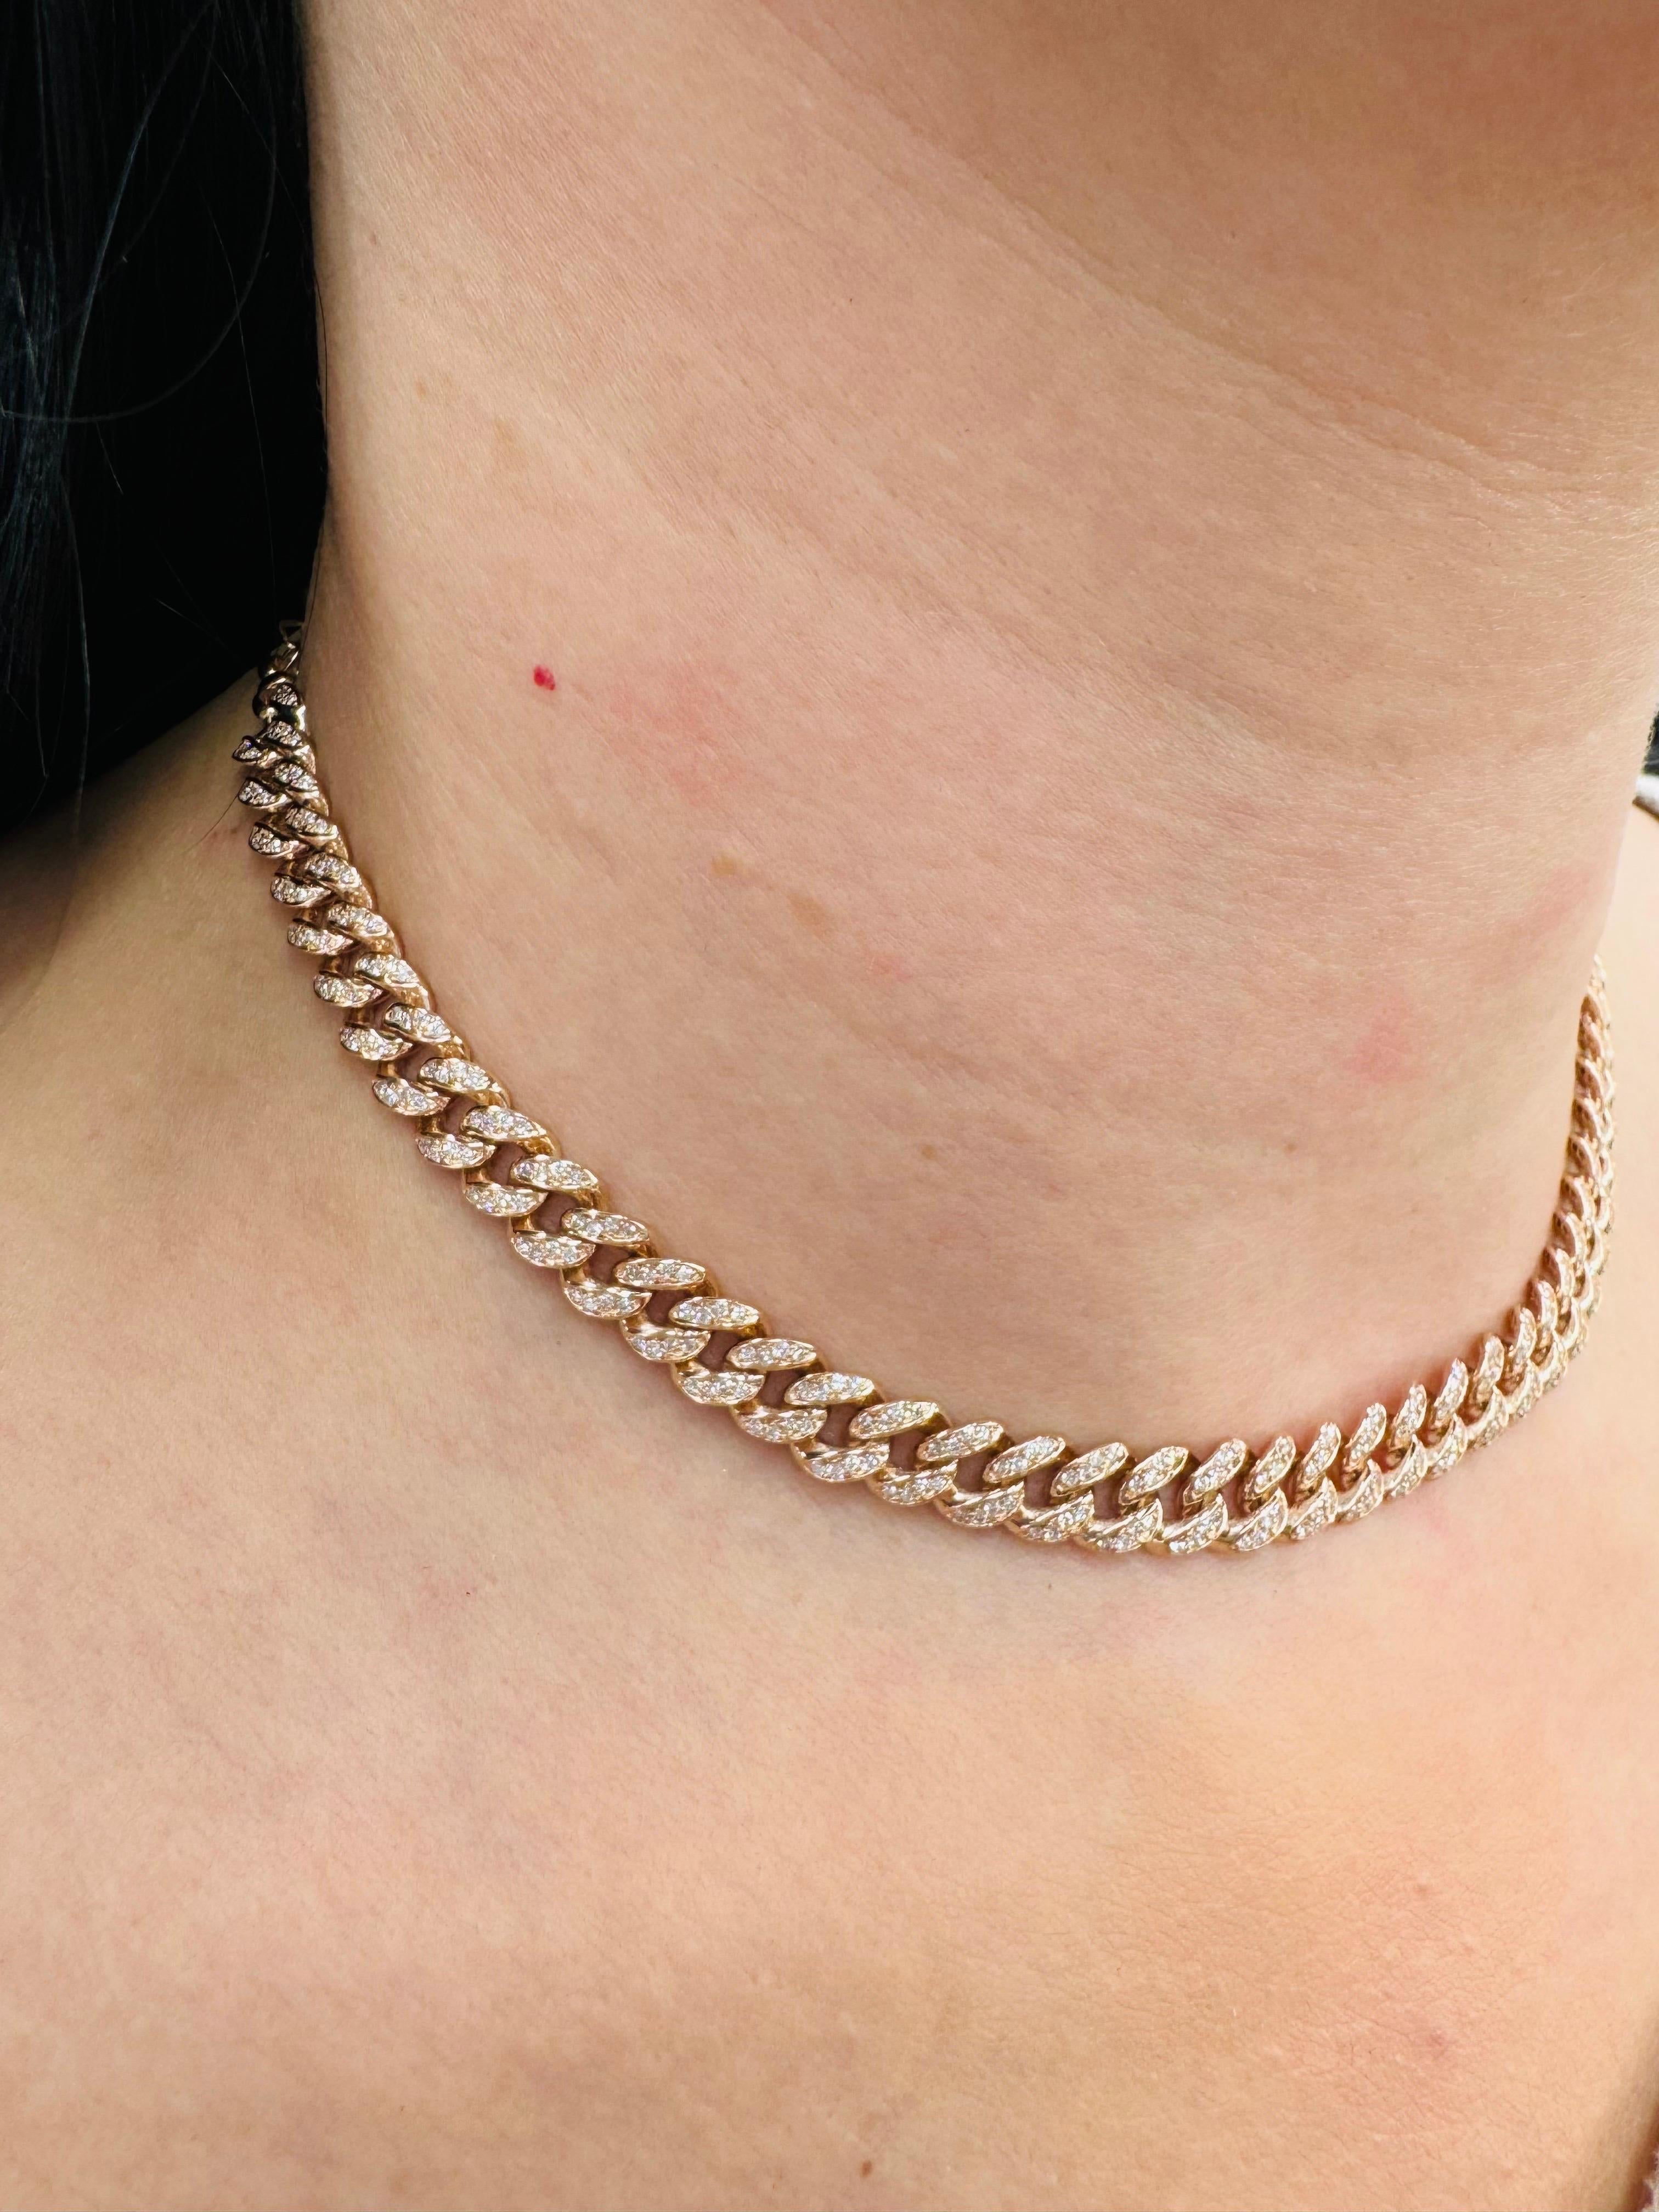 Diamond Cuban Link Choker Necklace Adjustable 1.88 Carats 14 Karat Rose Gold In New Condition For Sale In New York, NY